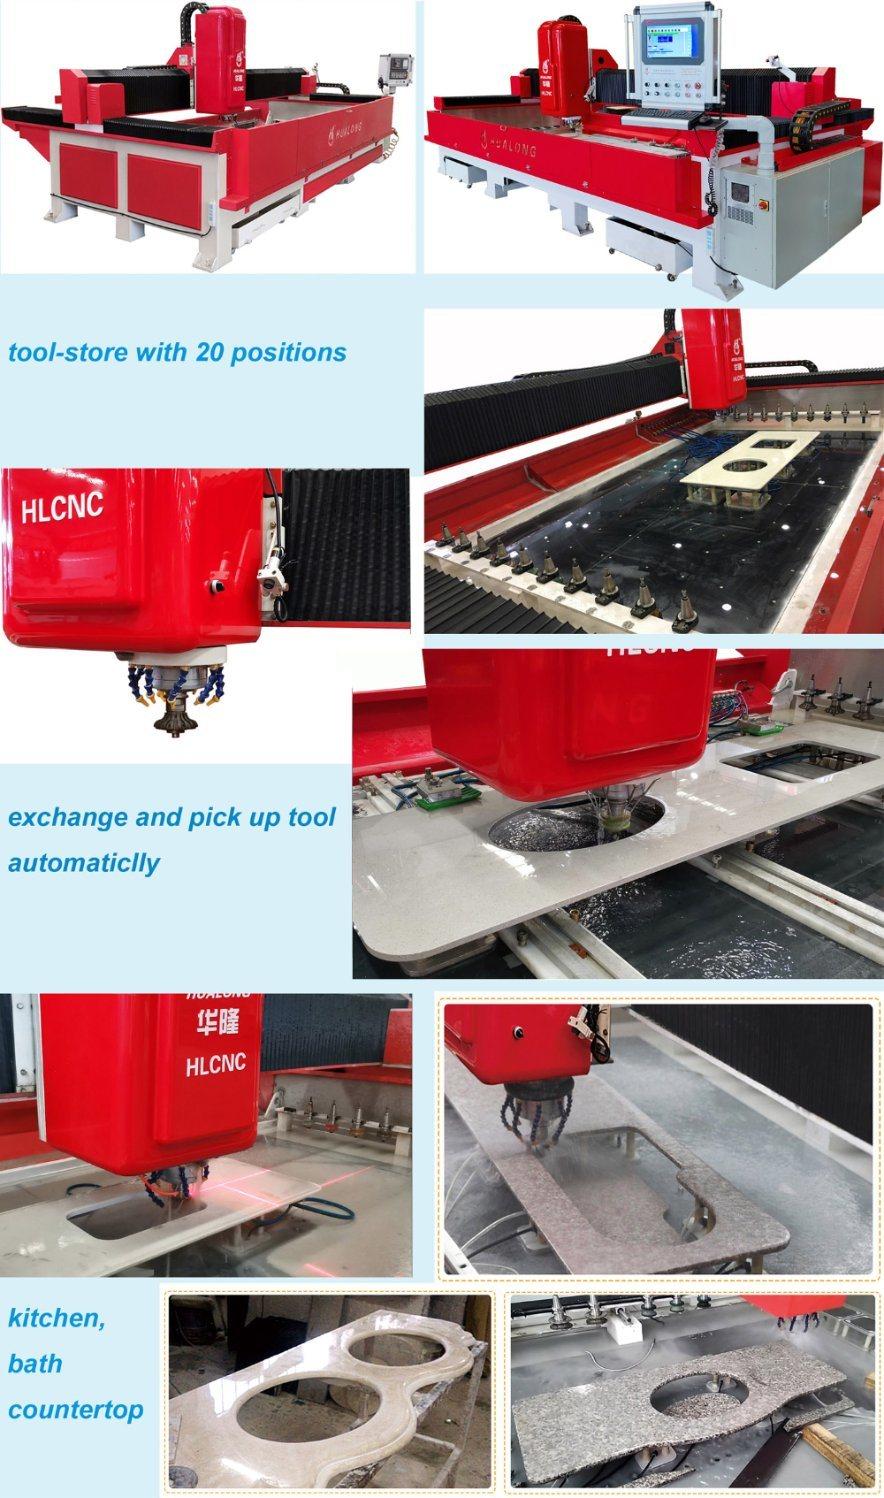 CE/380V Hlcnc-3319 Tile Cutter Countertop Processing Center Automatic CNC Sink Cutout Stone Cutting Machine High Speed for Quartz/Marble